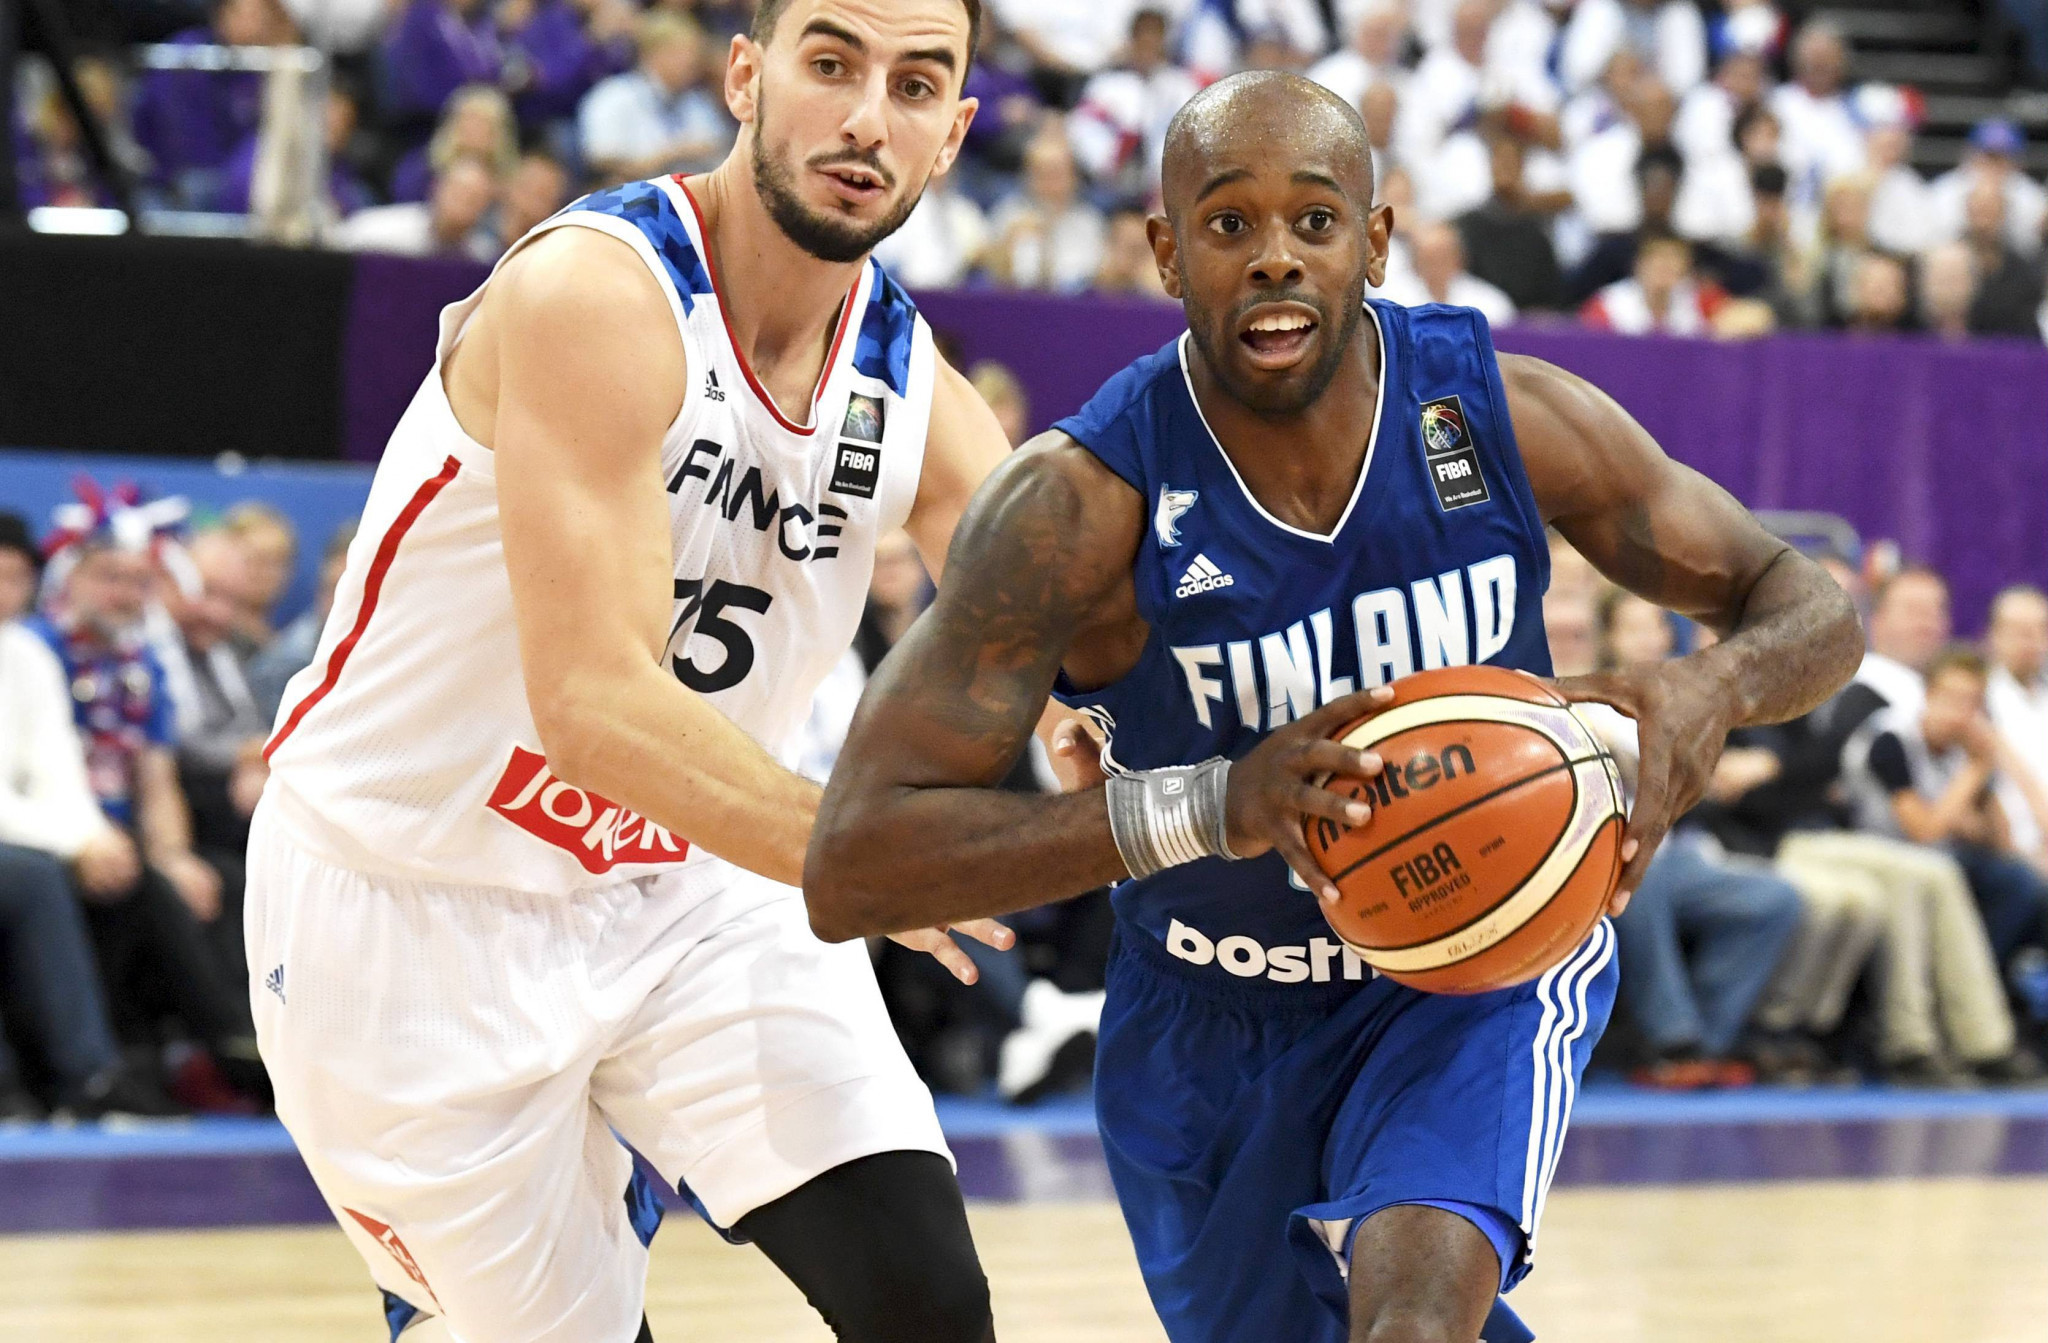 Finland shock France on day one of EuroBasket